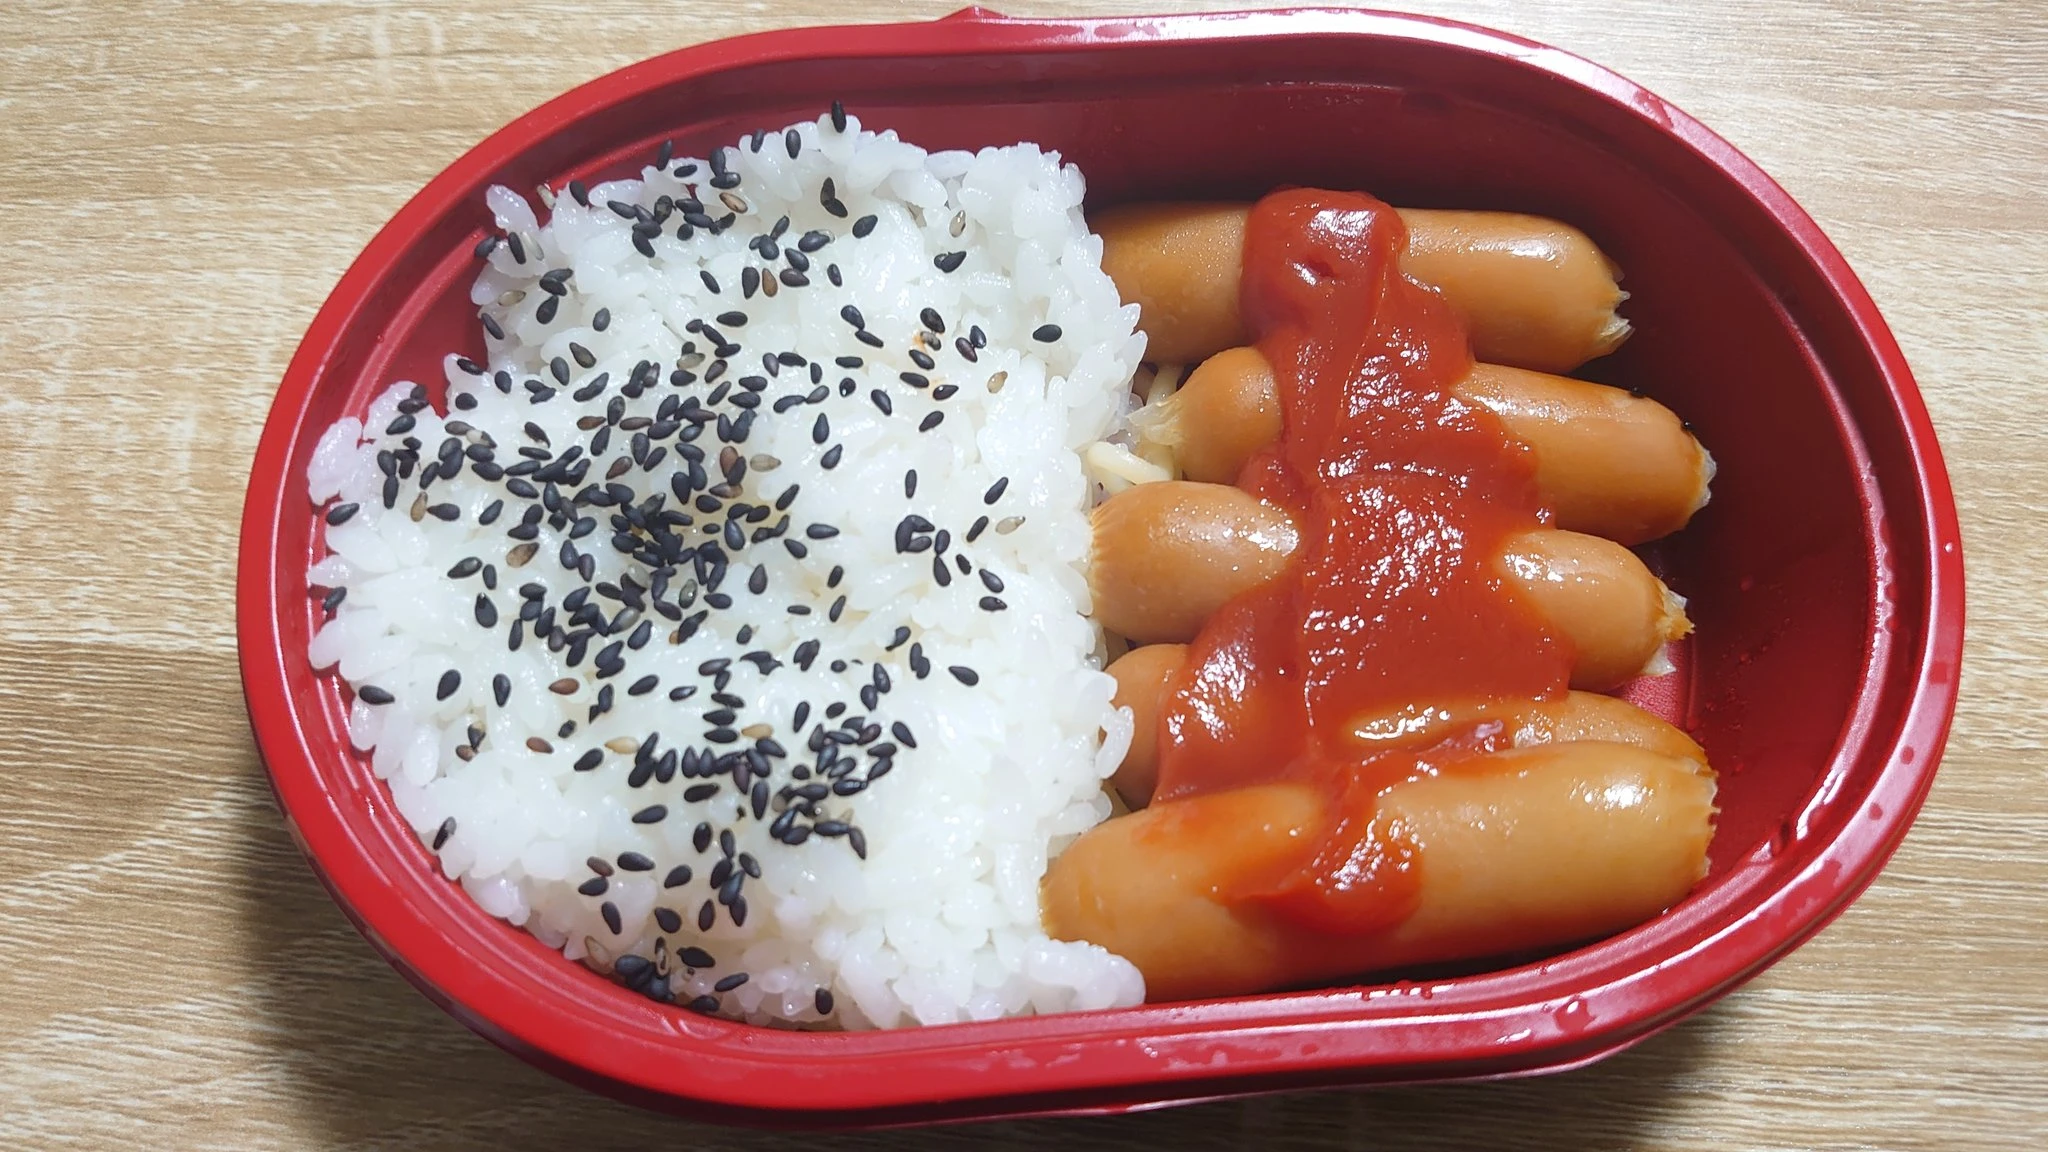 A 2,000 won lunch box at a convenience store in Japan that took 10 years from planning to selling.